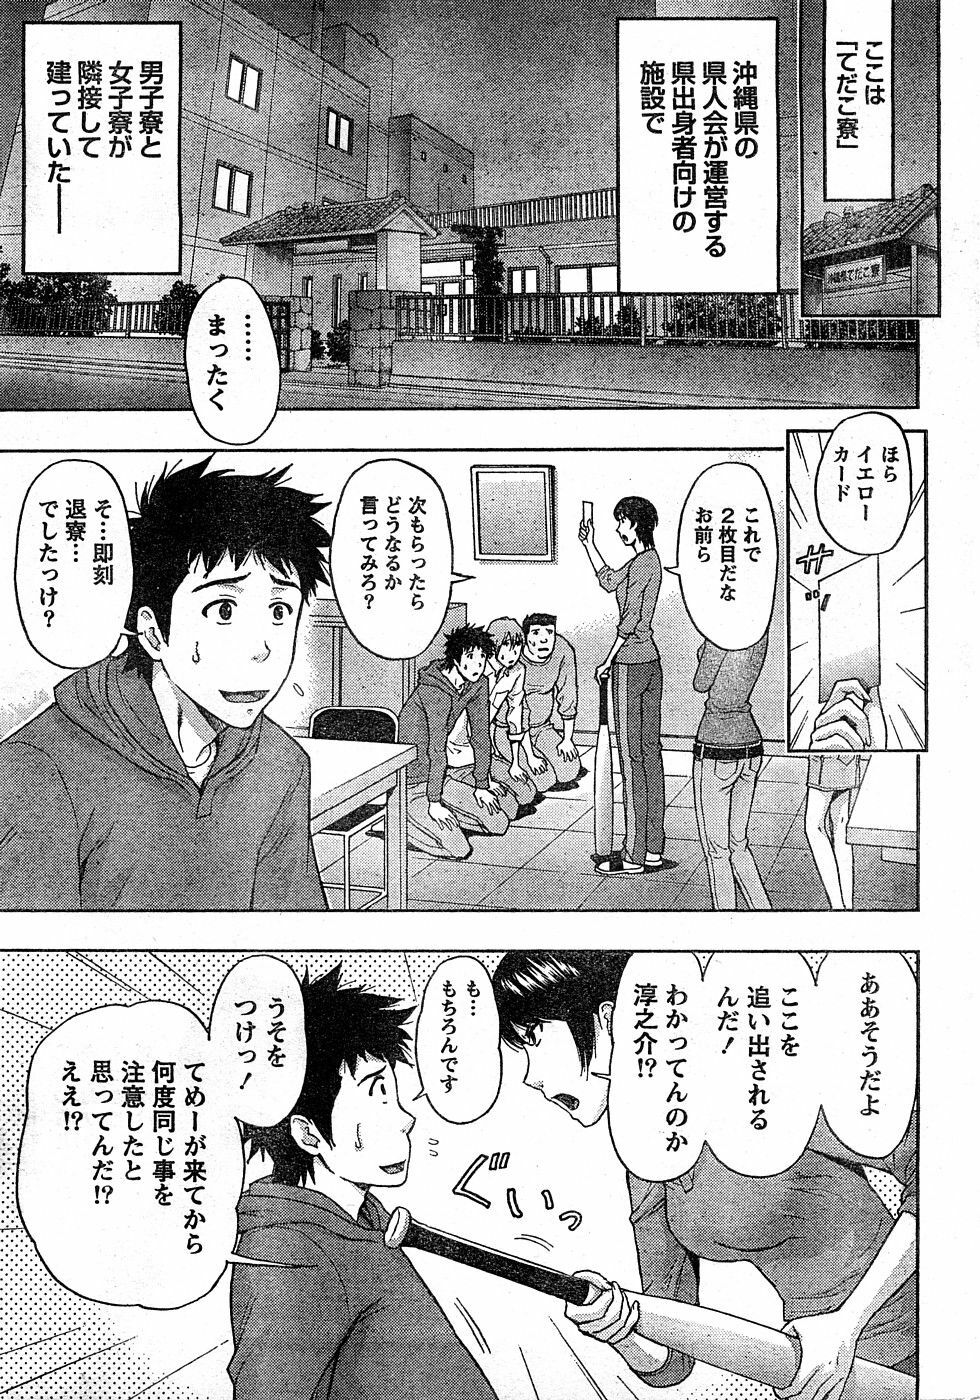 Monthly Vitaman 2009-02 [Incomplete] page 6 full